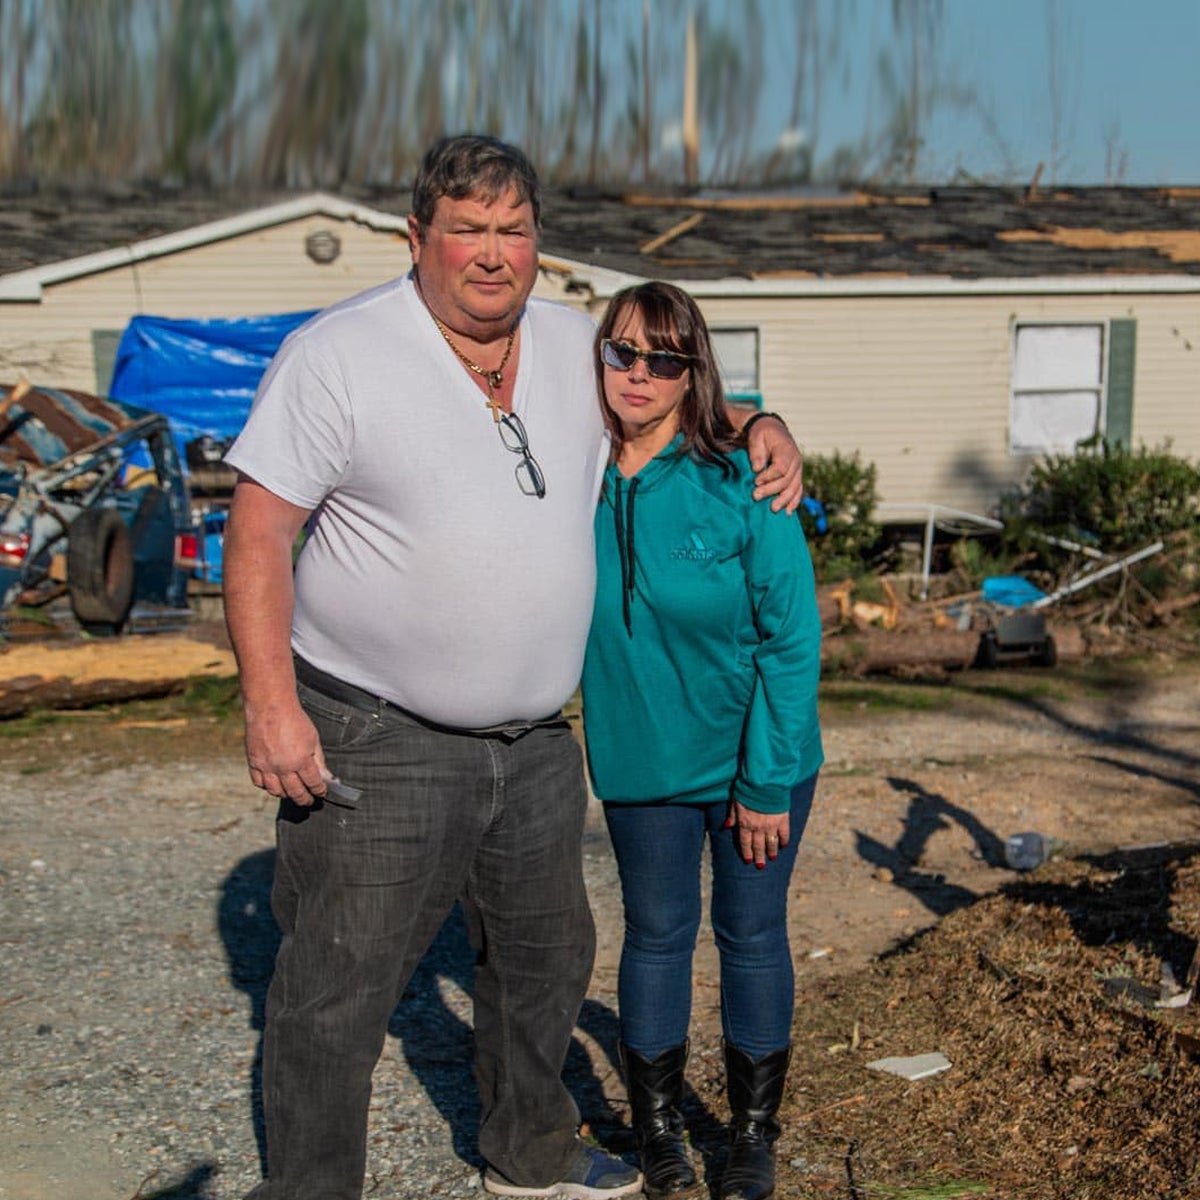 Victims of the Alabama tornadoes stand in front of their damaged home in need of disaster relief.